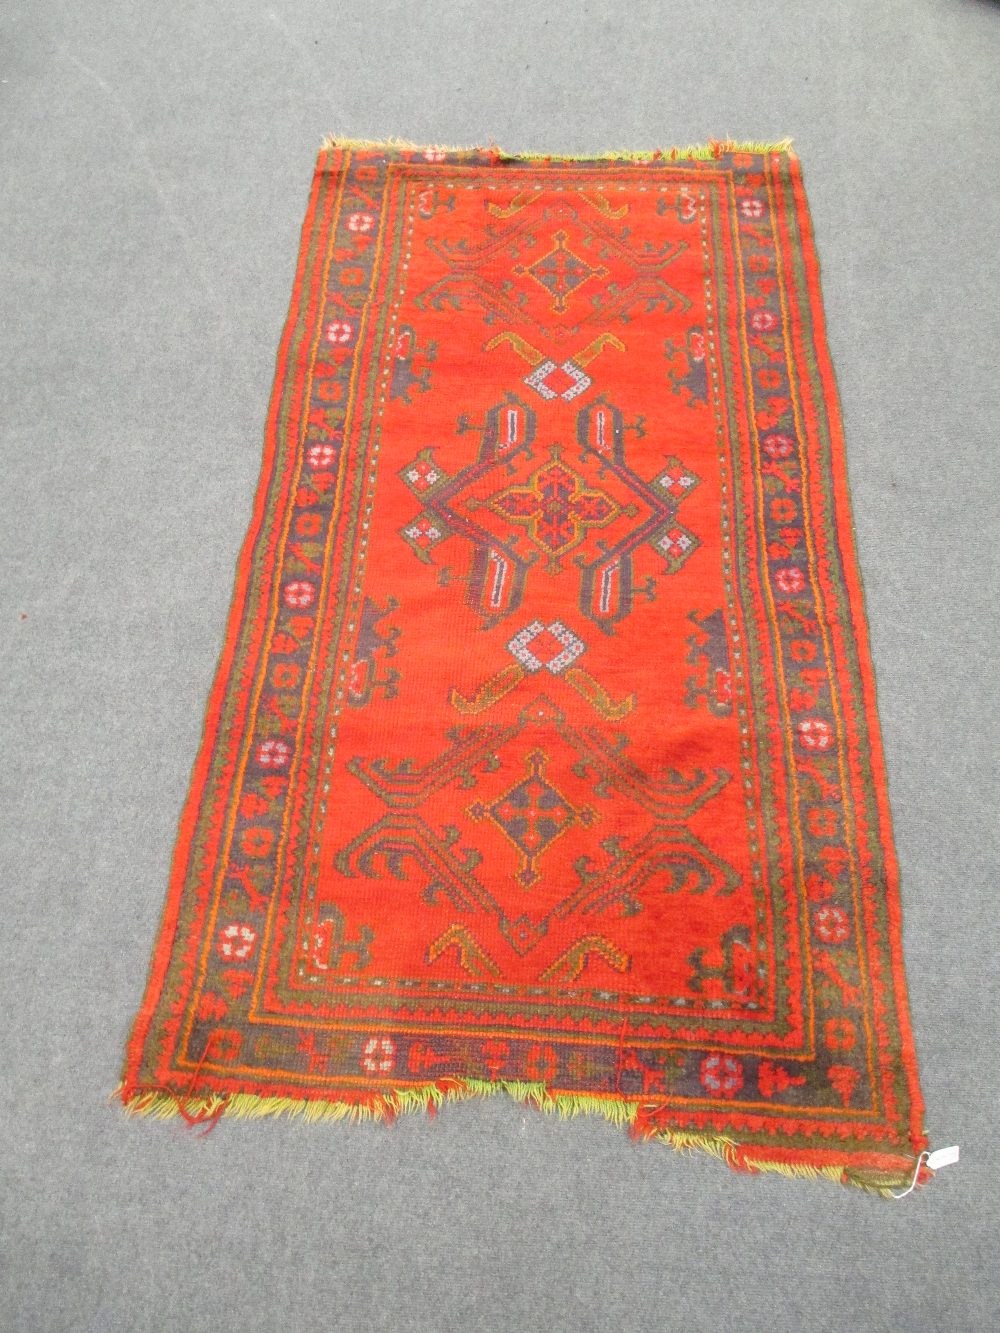 A red 'Turkey' rug and a shiraz rug 210 x 110cm and 150 x 112cm